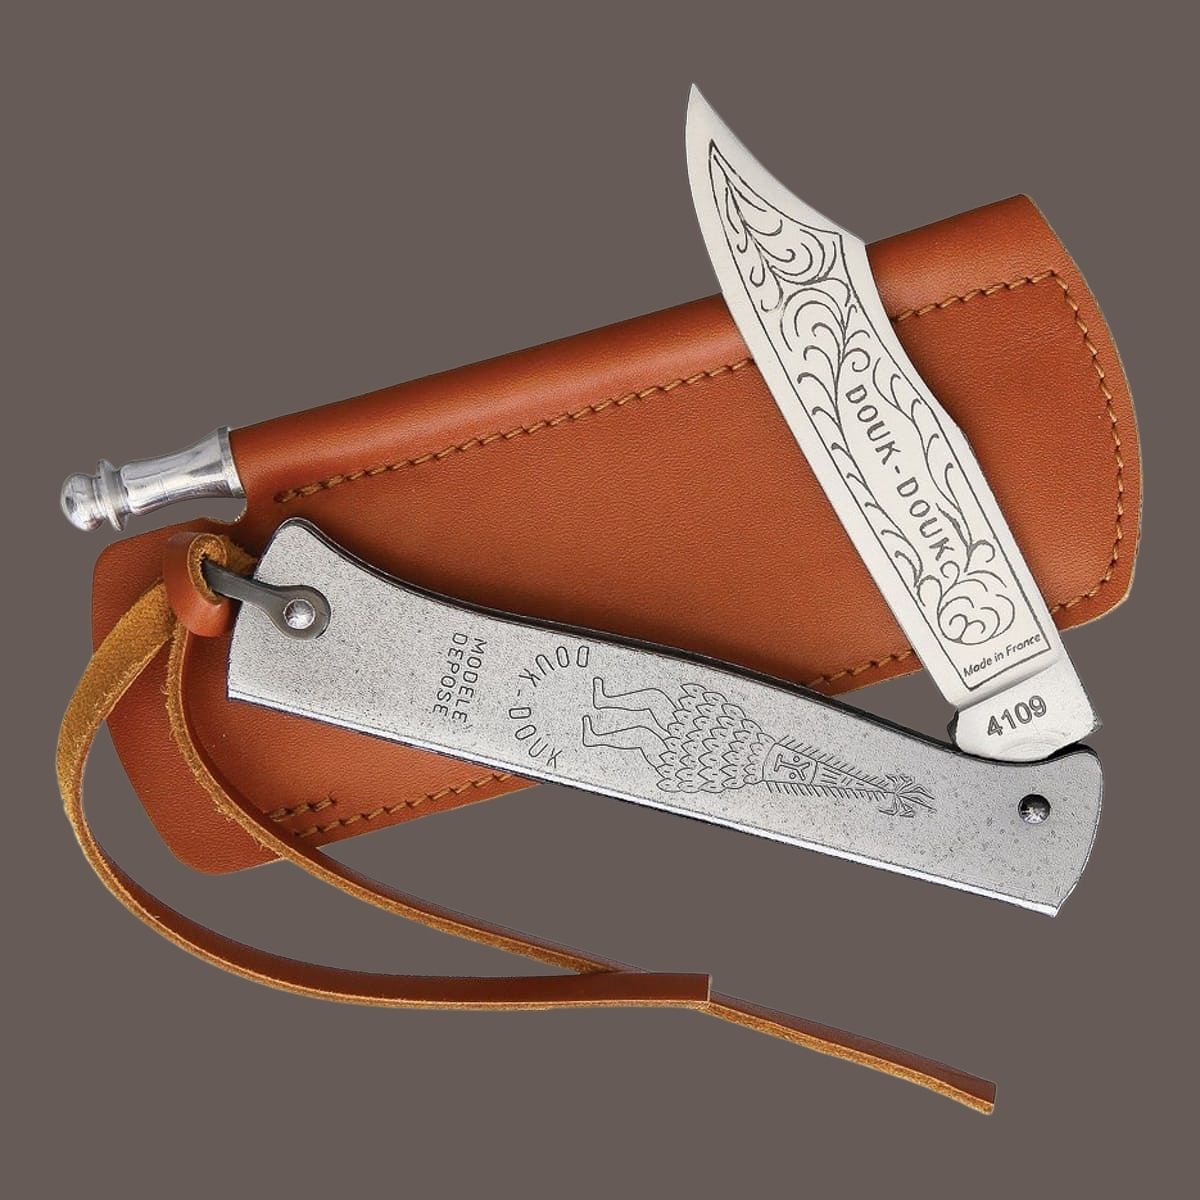 This French-made Artisan Douk Douk Knife Is The Perfect Gift For